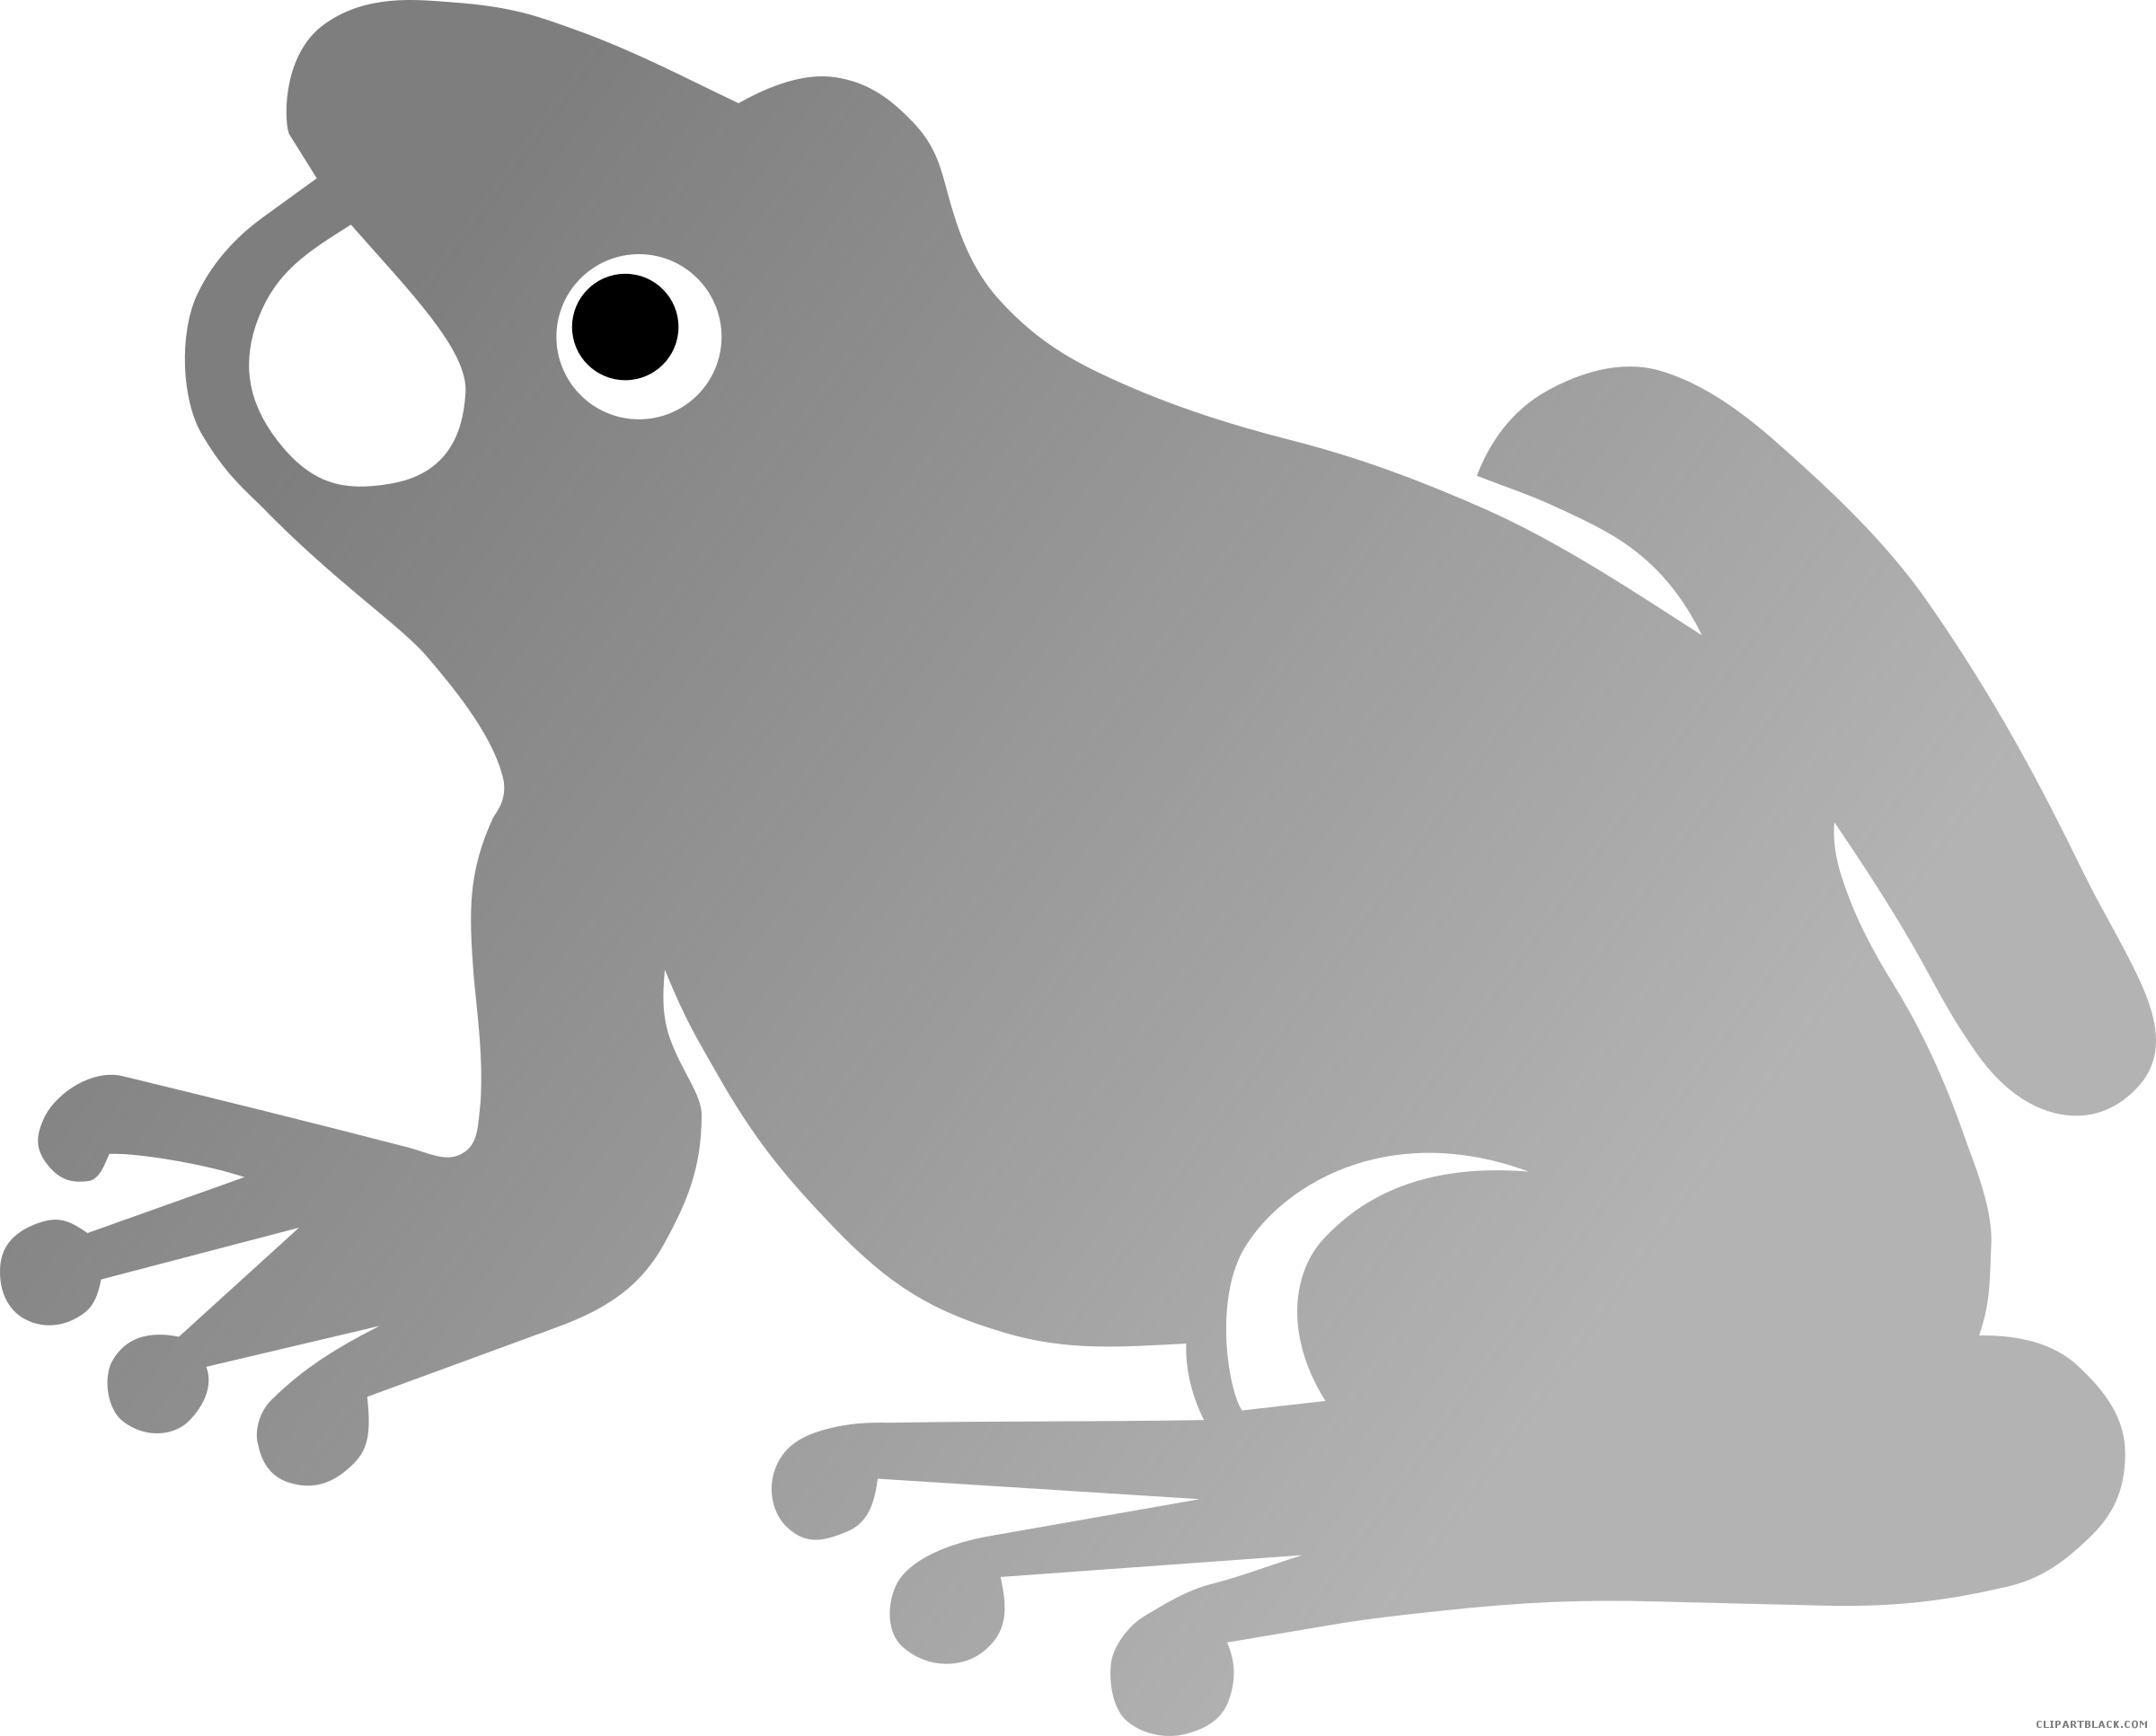 Frog clipartblack com animal. Frogs clipart silhouette